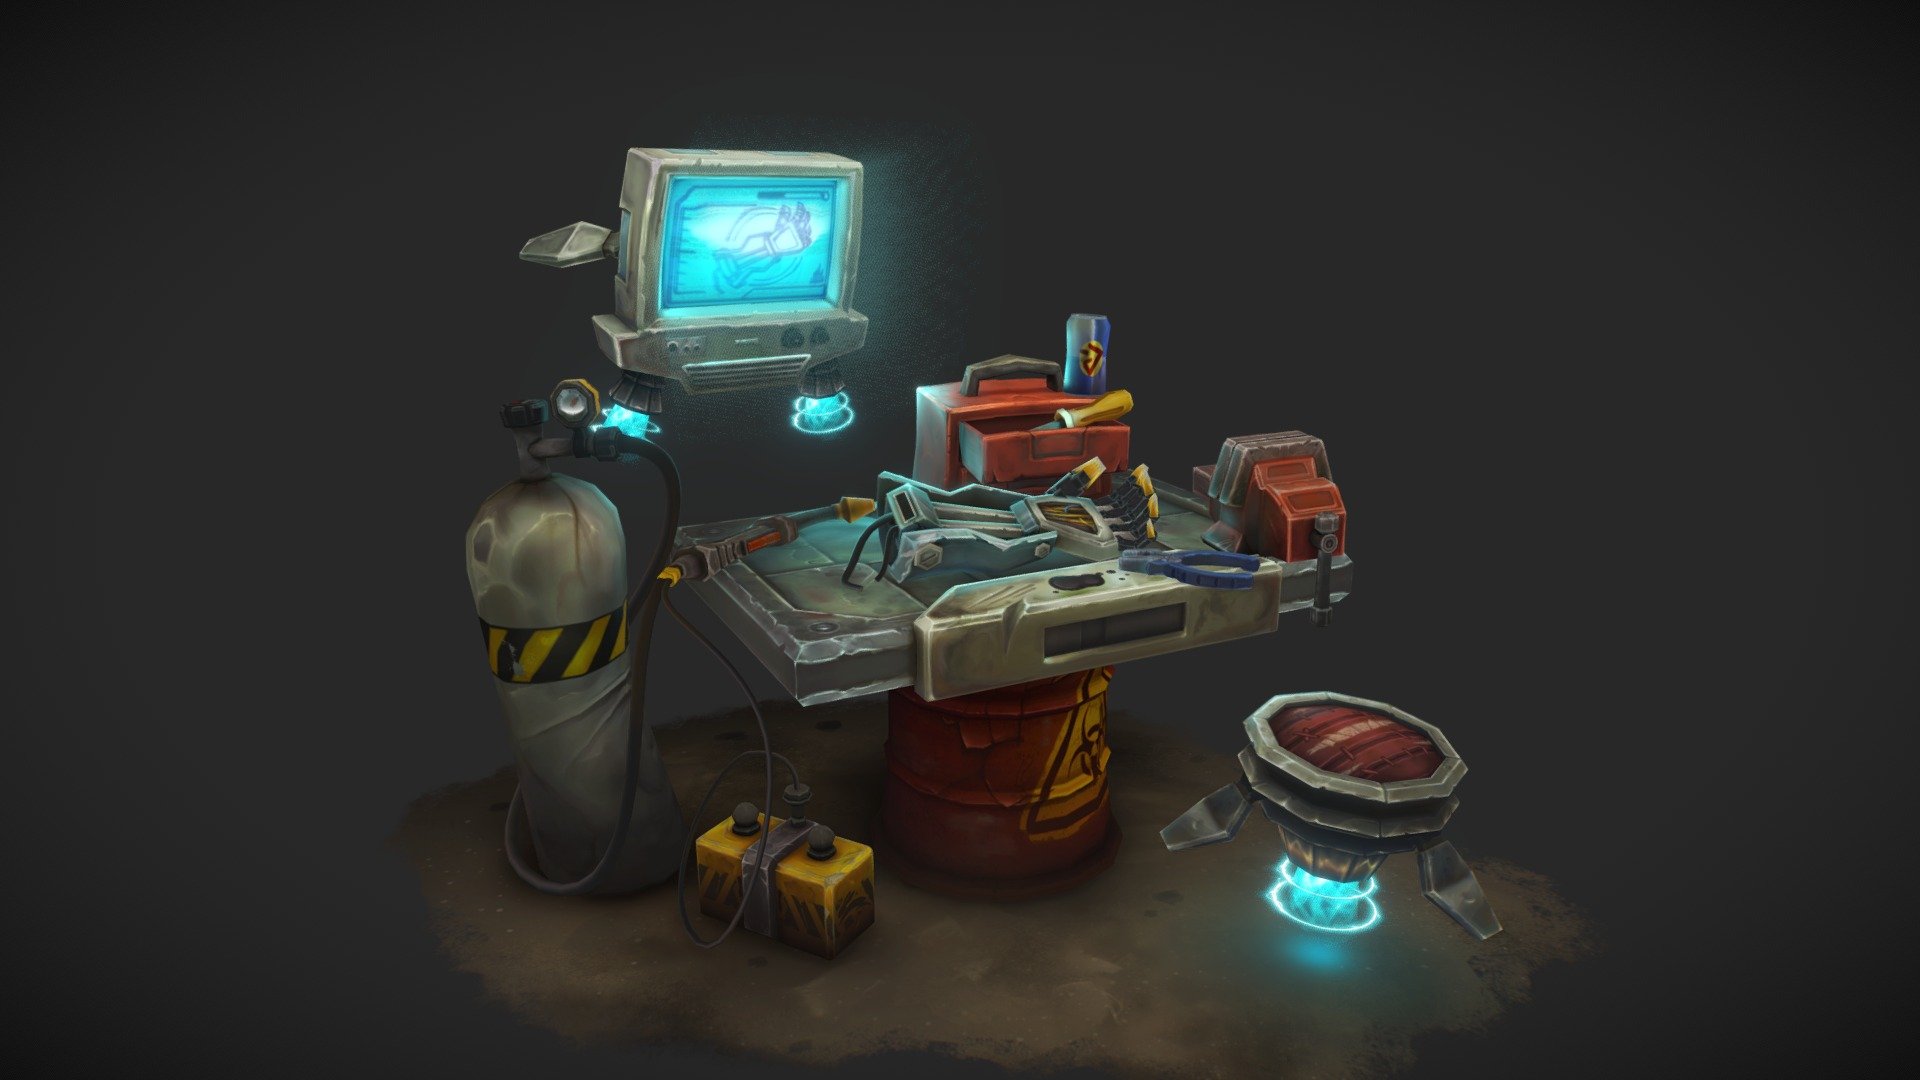 This was my submission for Weeks 3/4 of the CGMA Winter Term + Spending a bit of time polishing it and working on textures / lighting.
More shots and progress on my Artstation!
https://www.artstation.com/artwork/YaXO4Y - Junkyard Battle Bot Work Bench - CGMA Assignment - 3D model by patklis 3d model